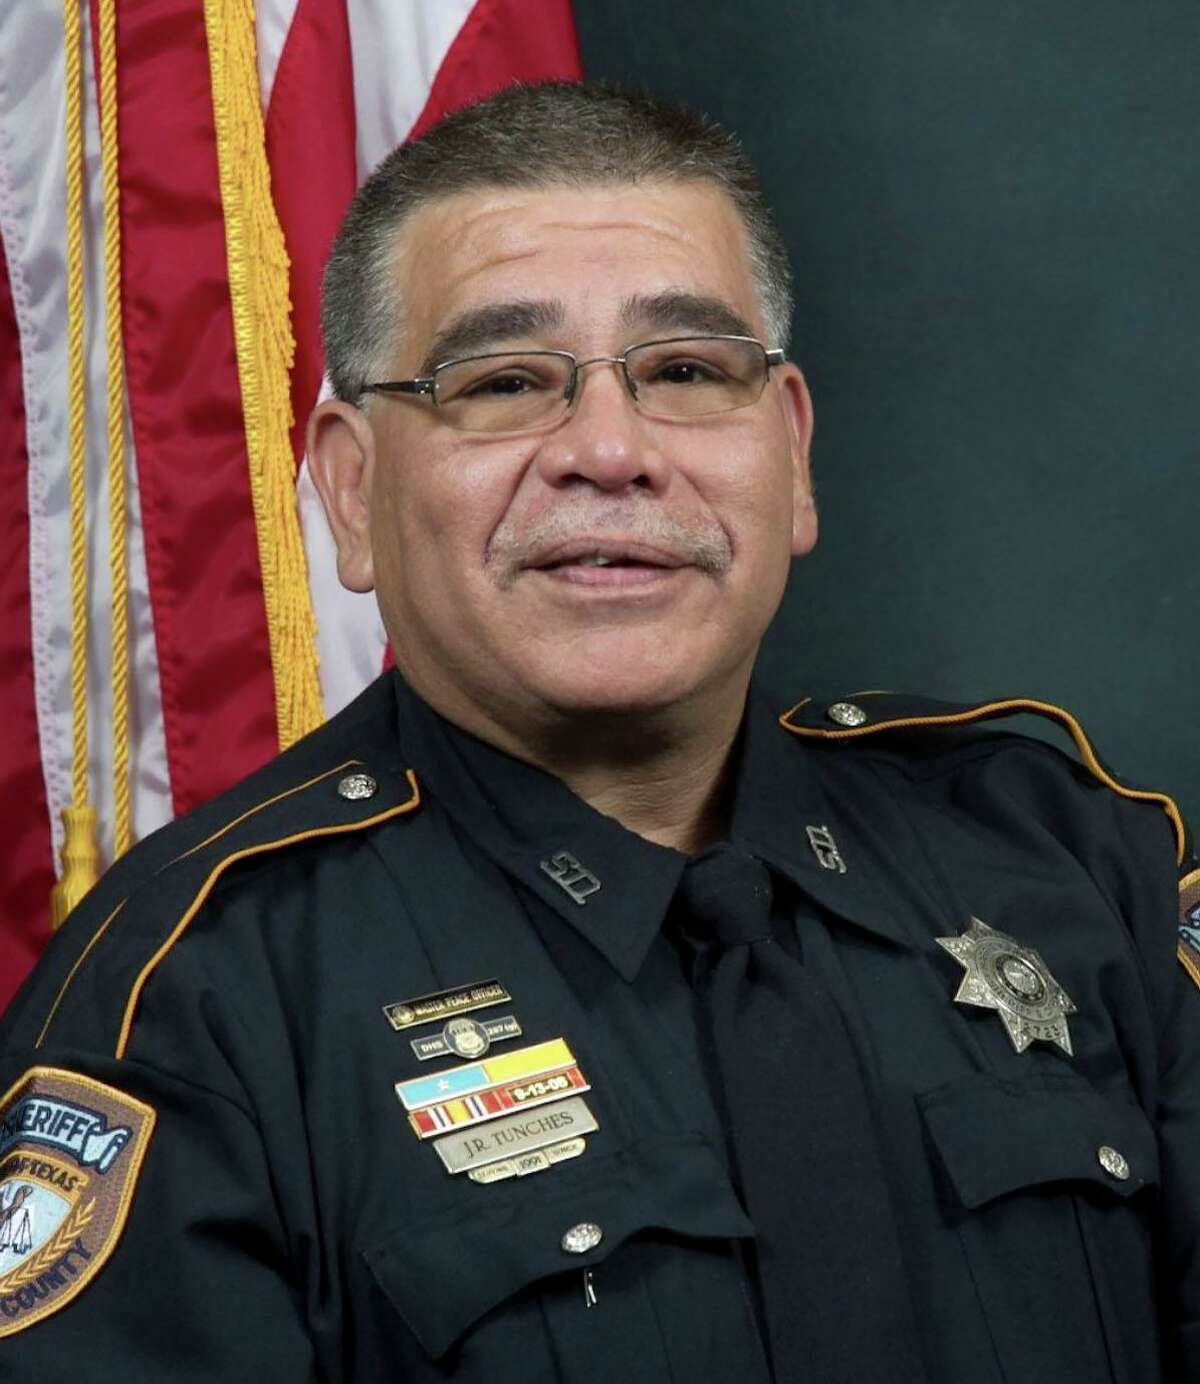 Harris County Sheriff's Office Deputy Johnny Tunches, 56, died on Nov. 3, 2020 after a battle against COVID19. Tunches was a 29-year veteran of the HCSO.